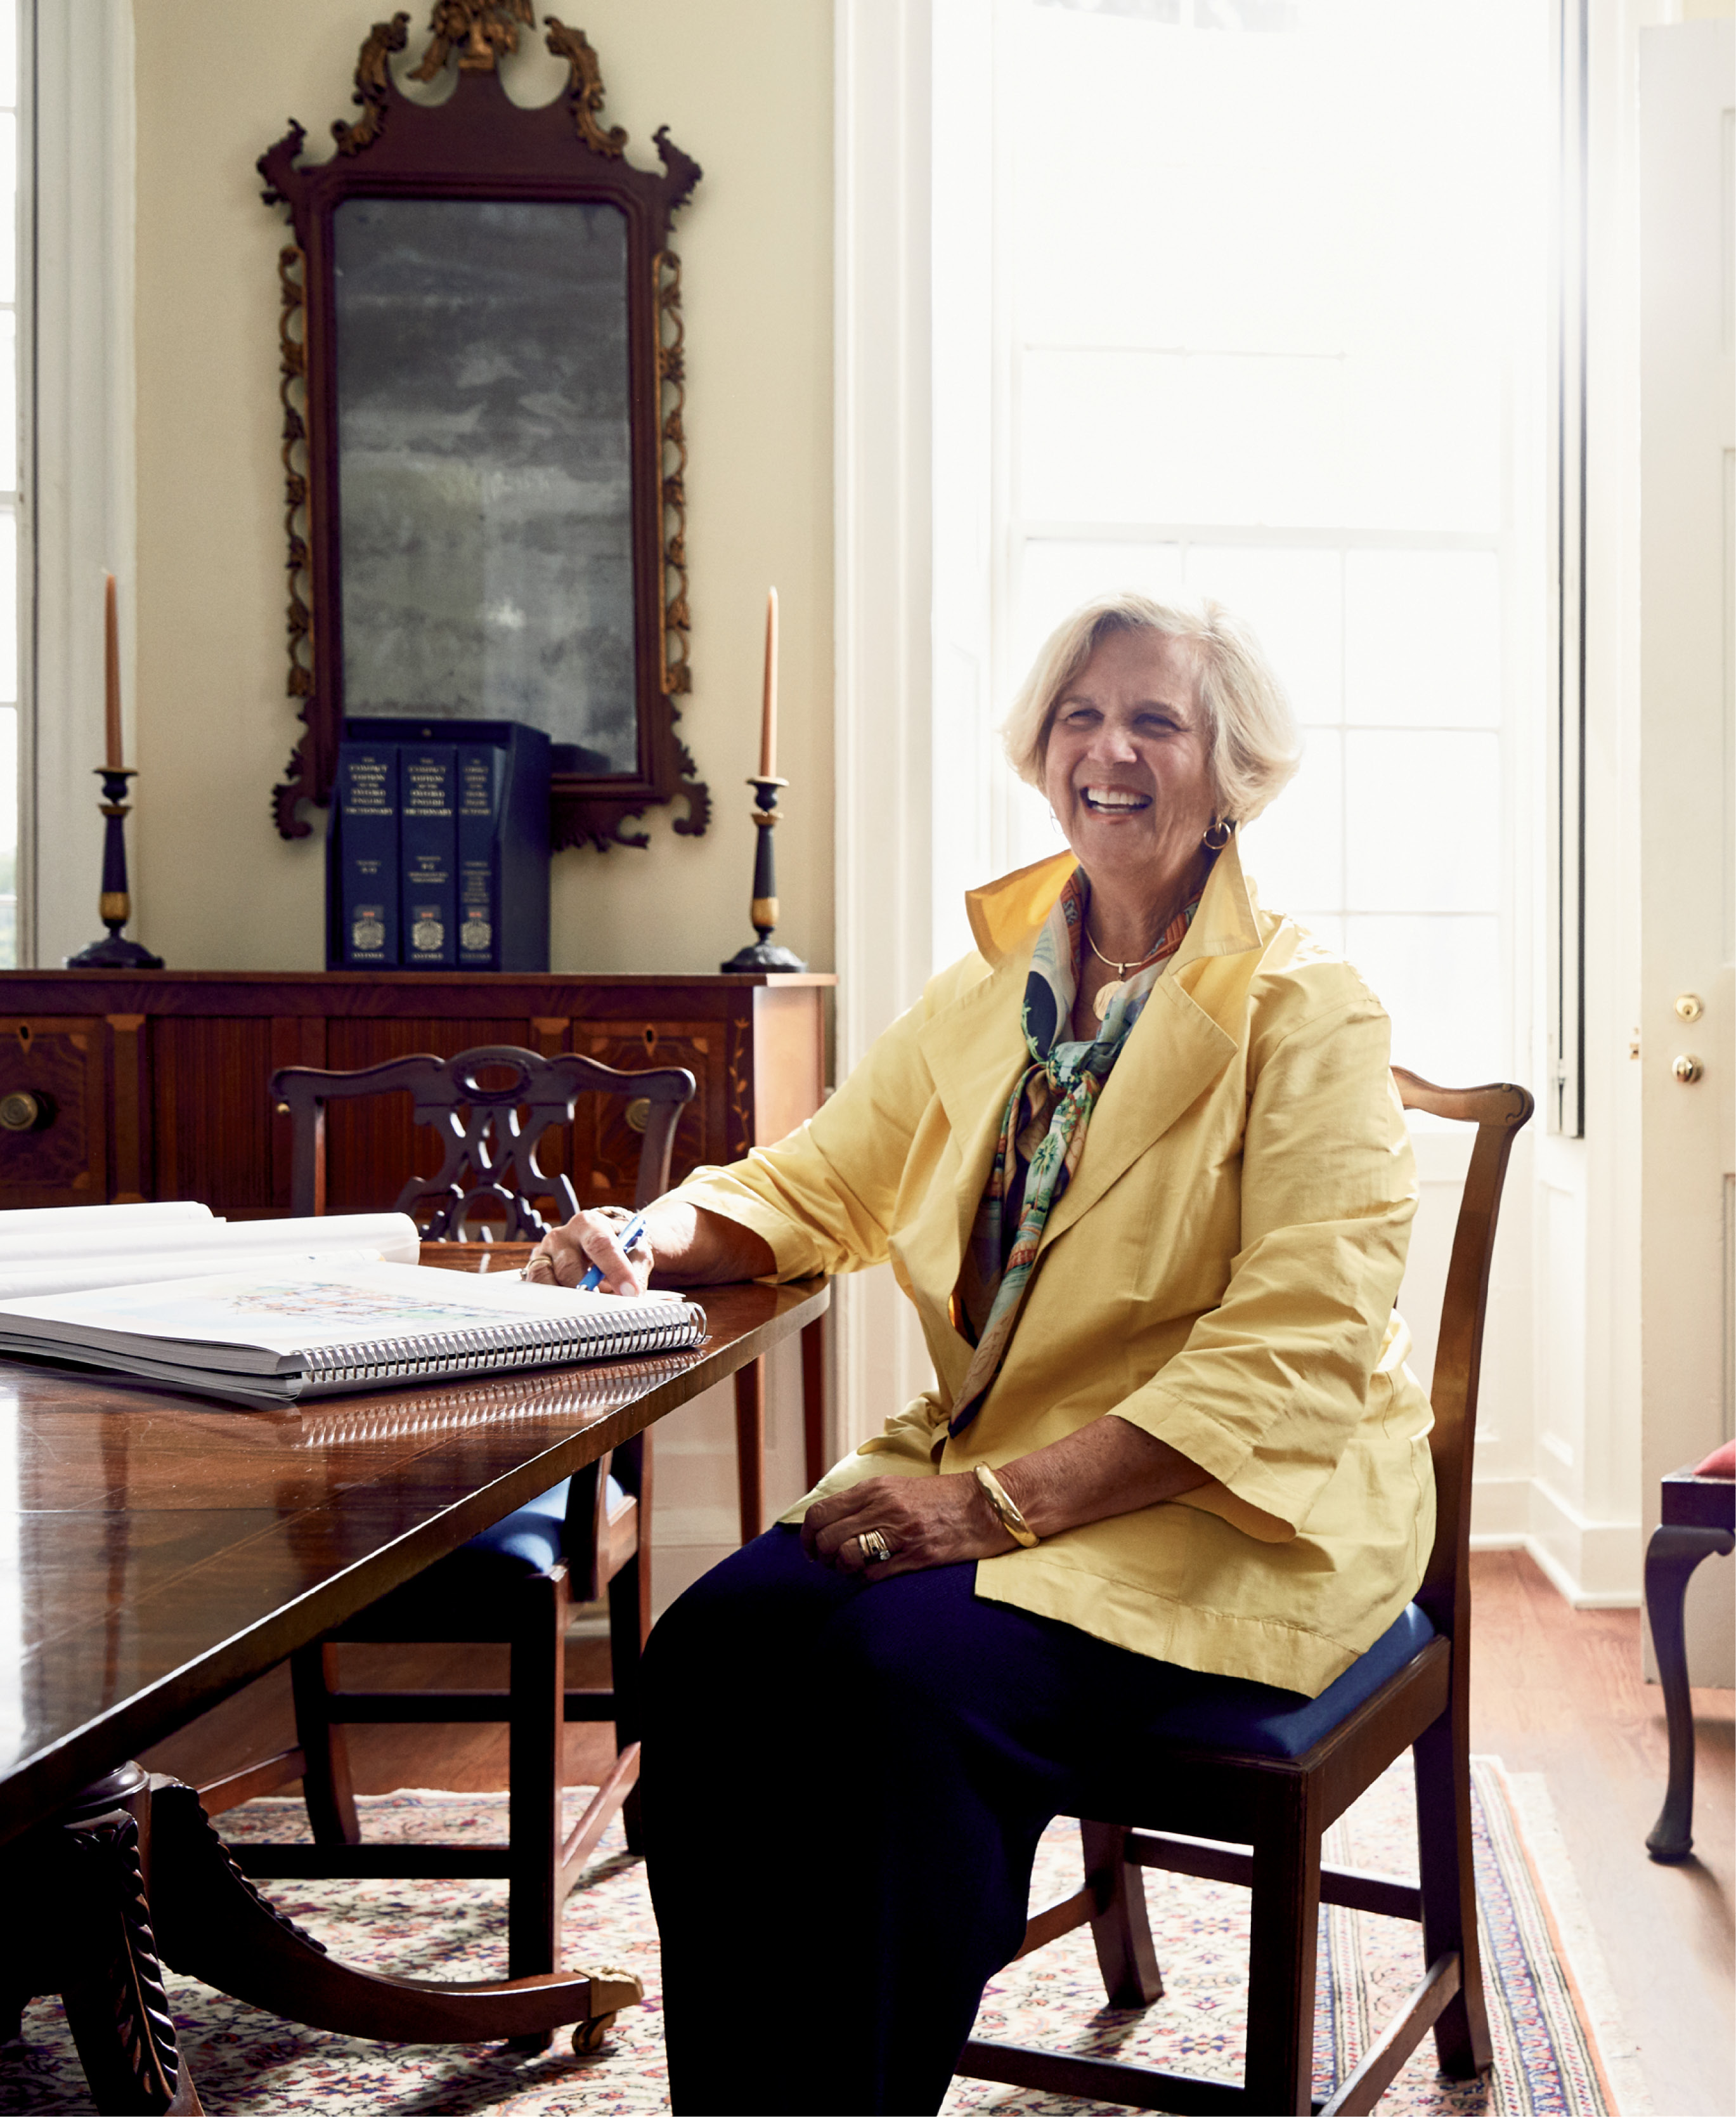 “I don’t want the city to lose its character, to be overrun by too many cruise ships, hotels, and visitors. I want Charleston to keep its standards high.” —Kitty Robinson